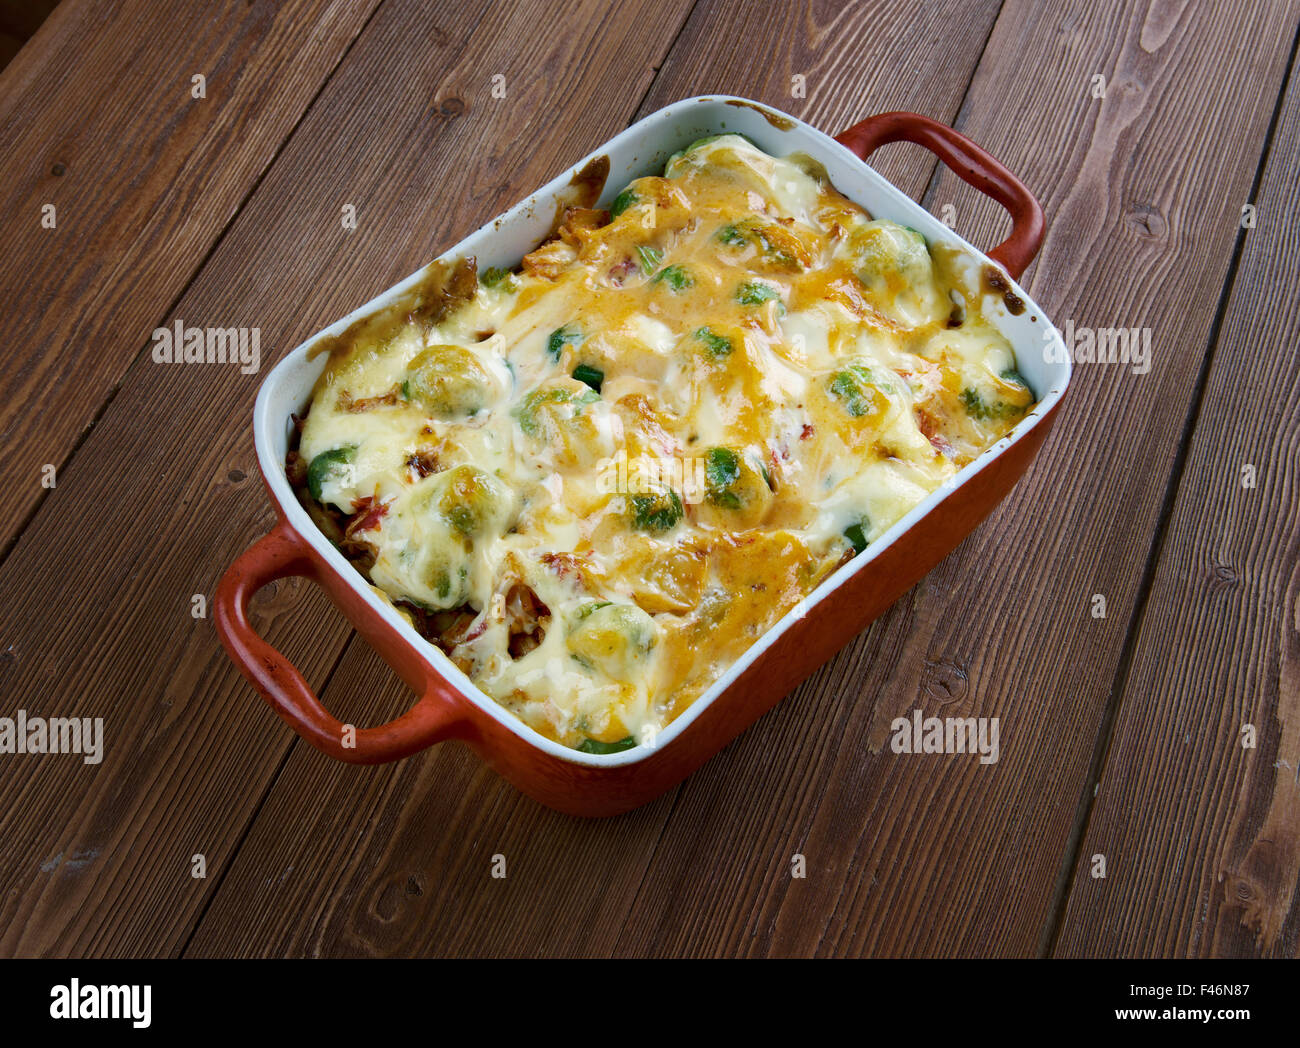 Homemade Chicken Divan - chicken casserole served with almonds, and Mornay sauce.  American cuisine Stock Photo